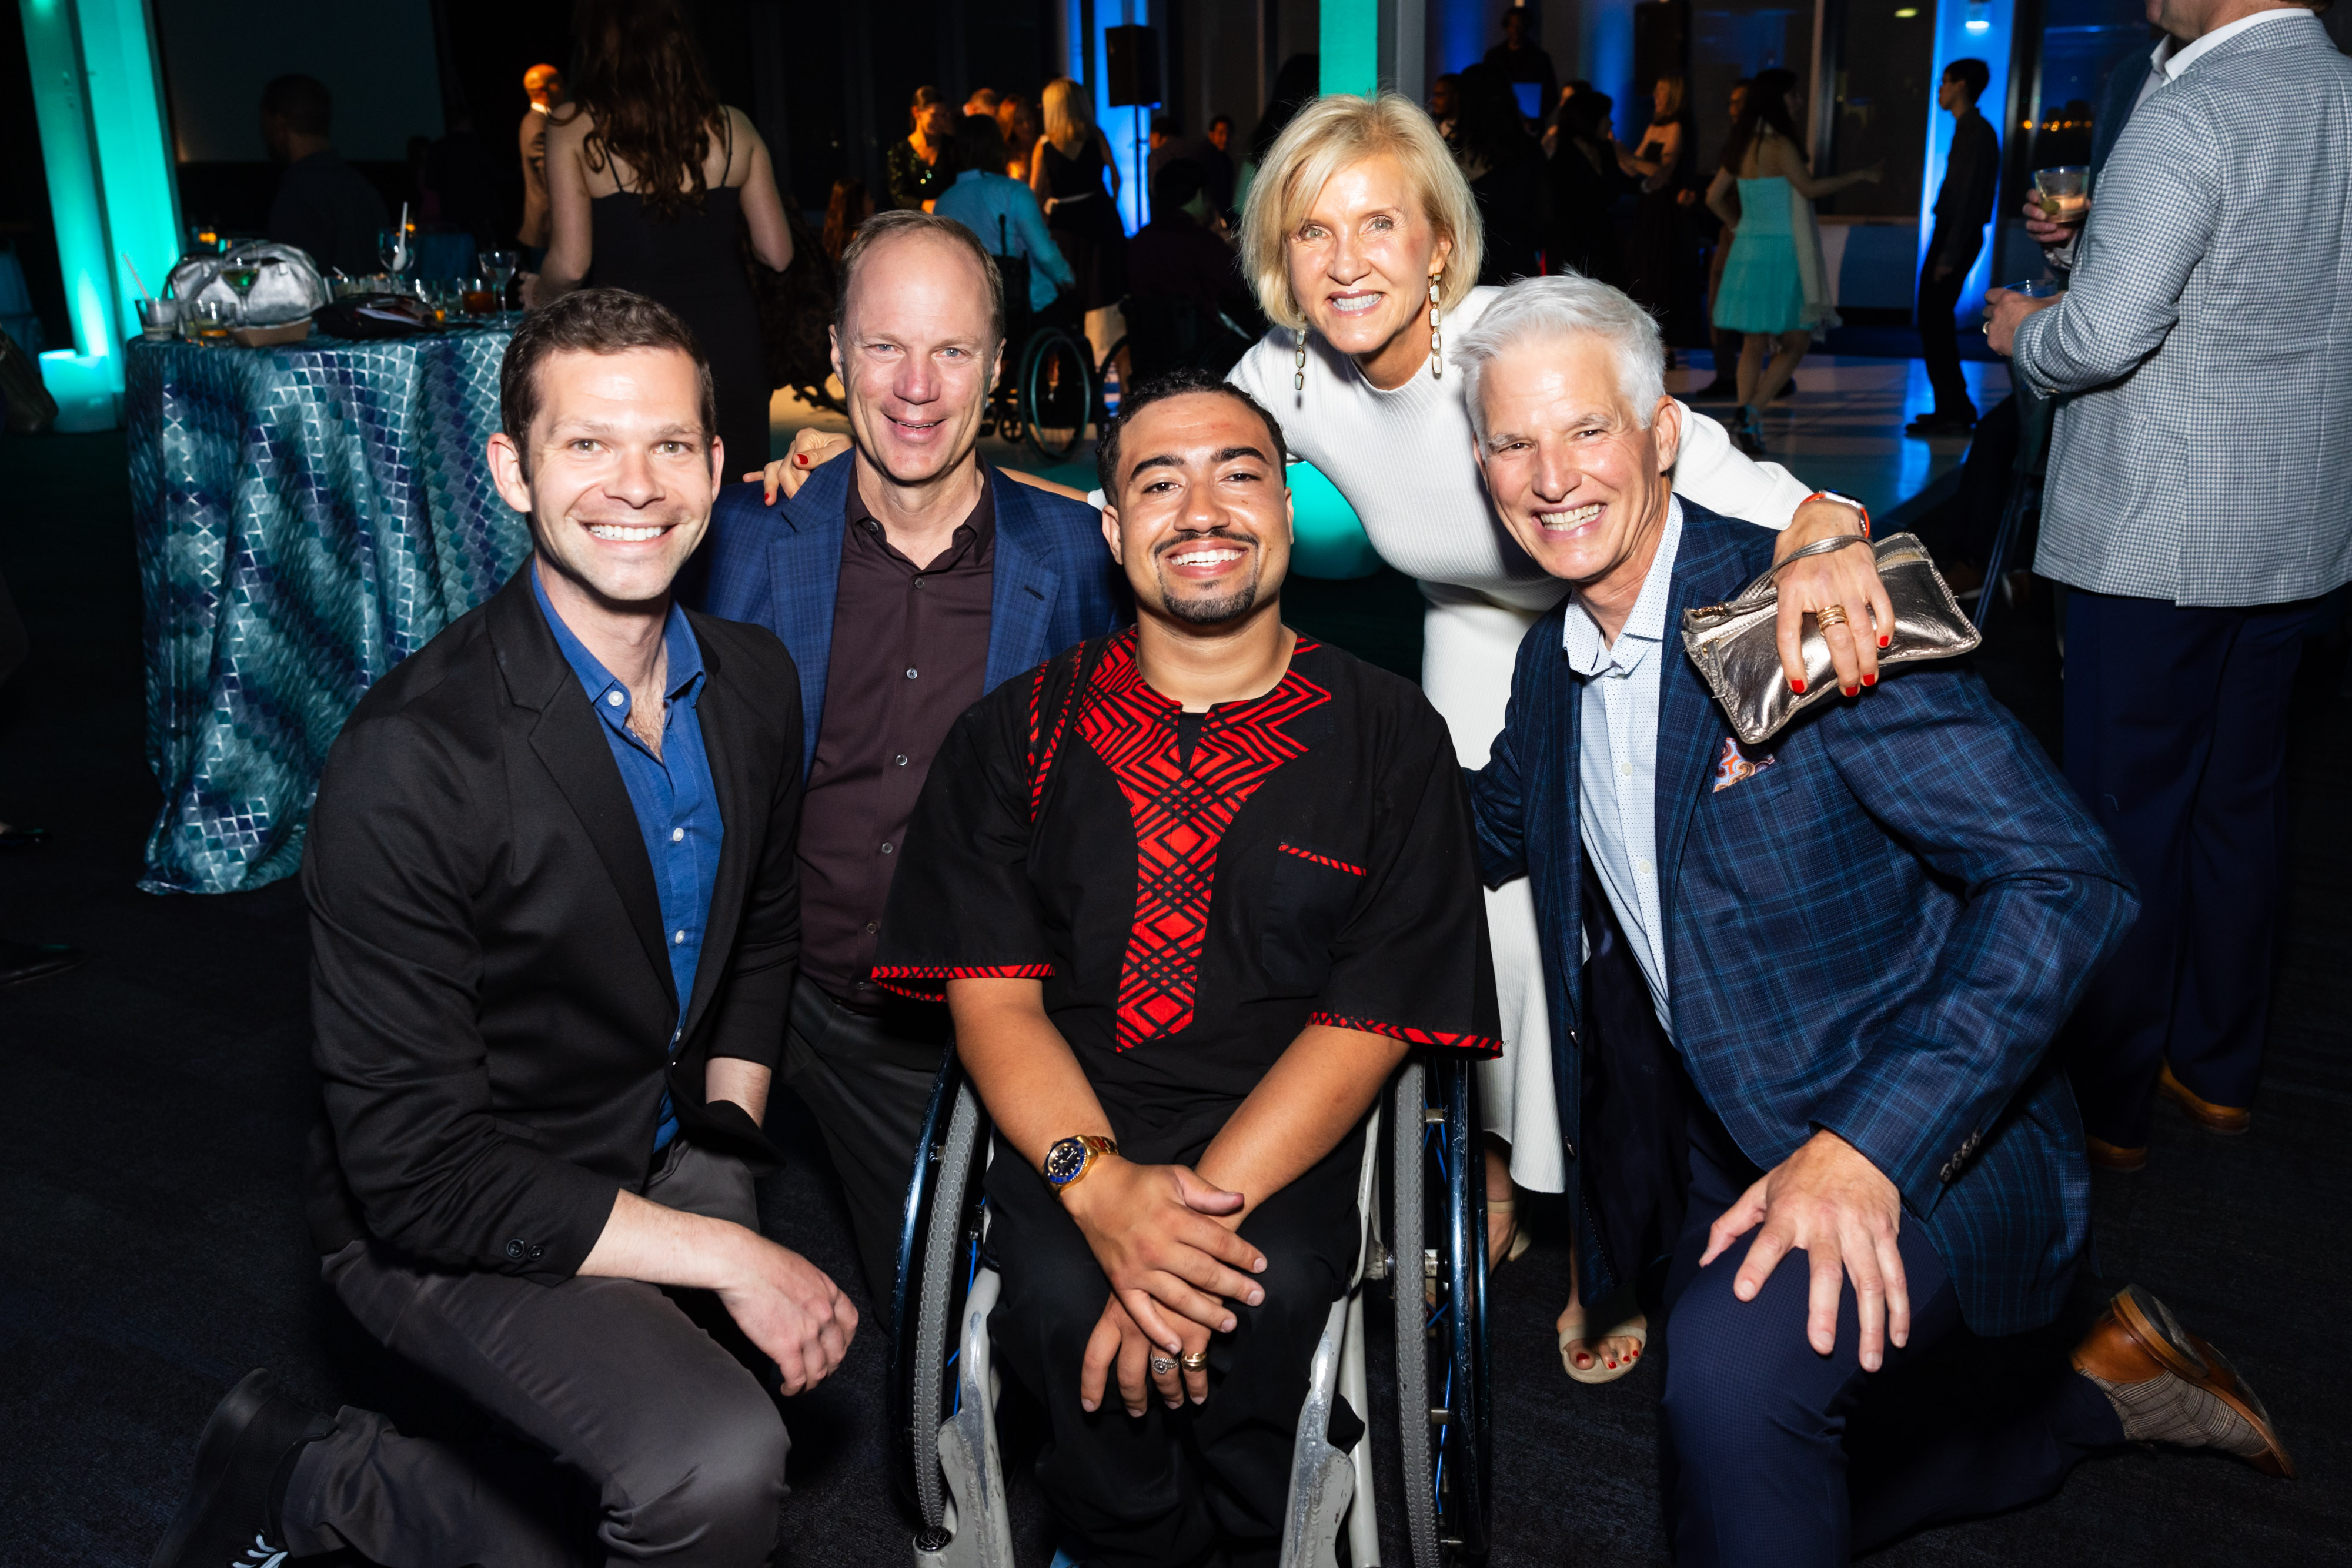 A Night to Remember at Pier 27 Shows the Extraordinary Power of Dreams 